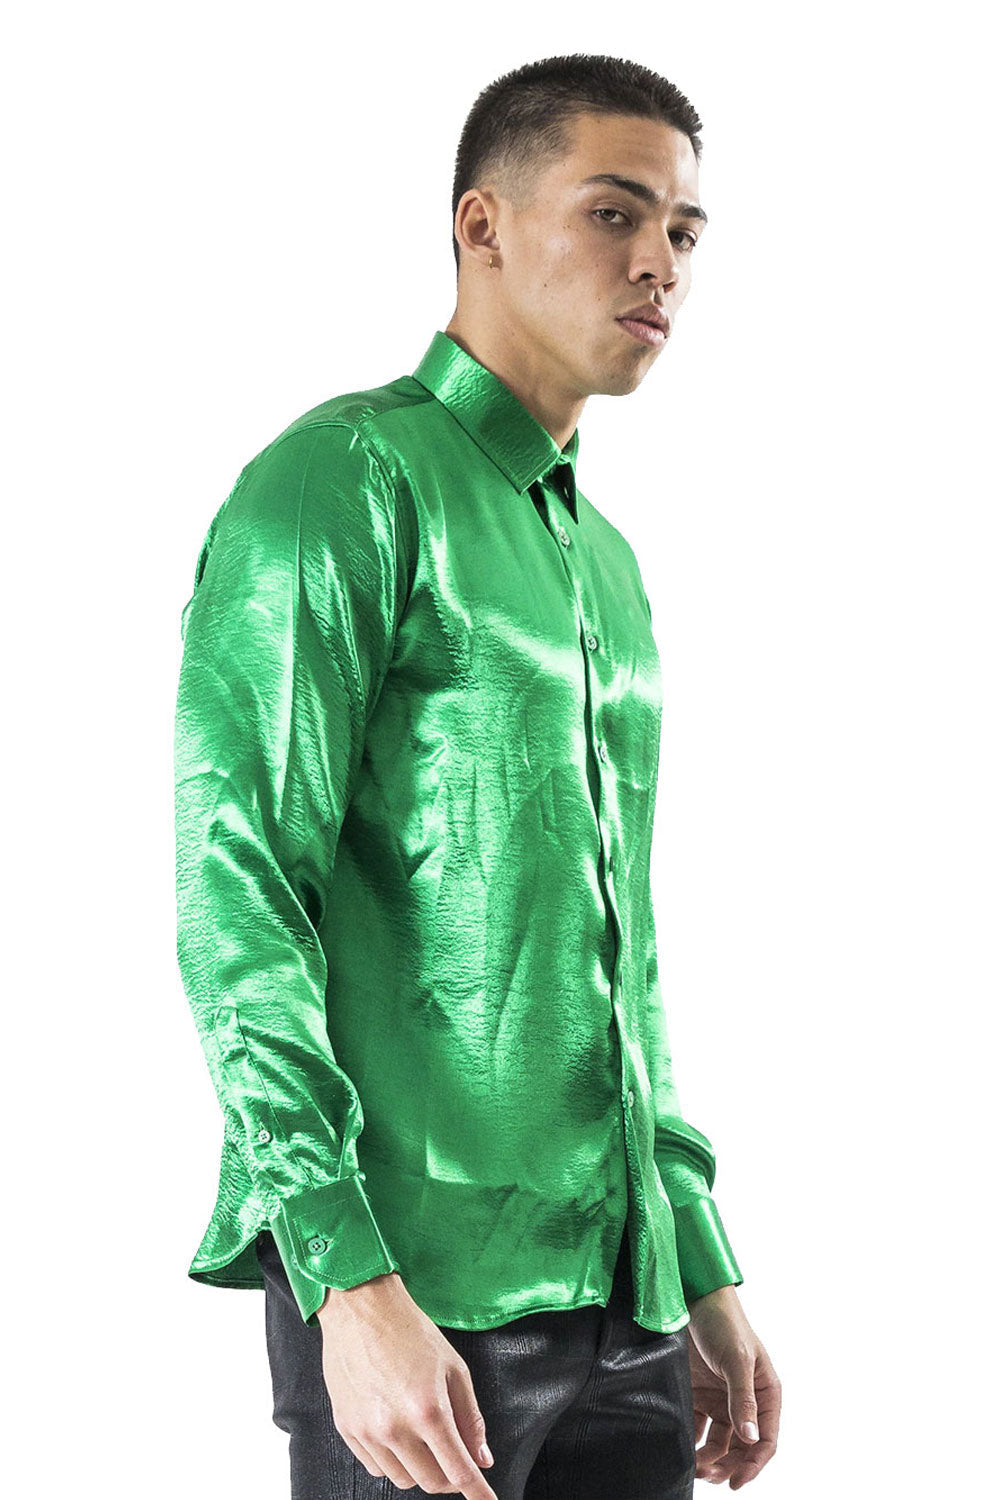 Men's Shinny Solid Color Button Down Long Sleeves Shirts B3202 Green